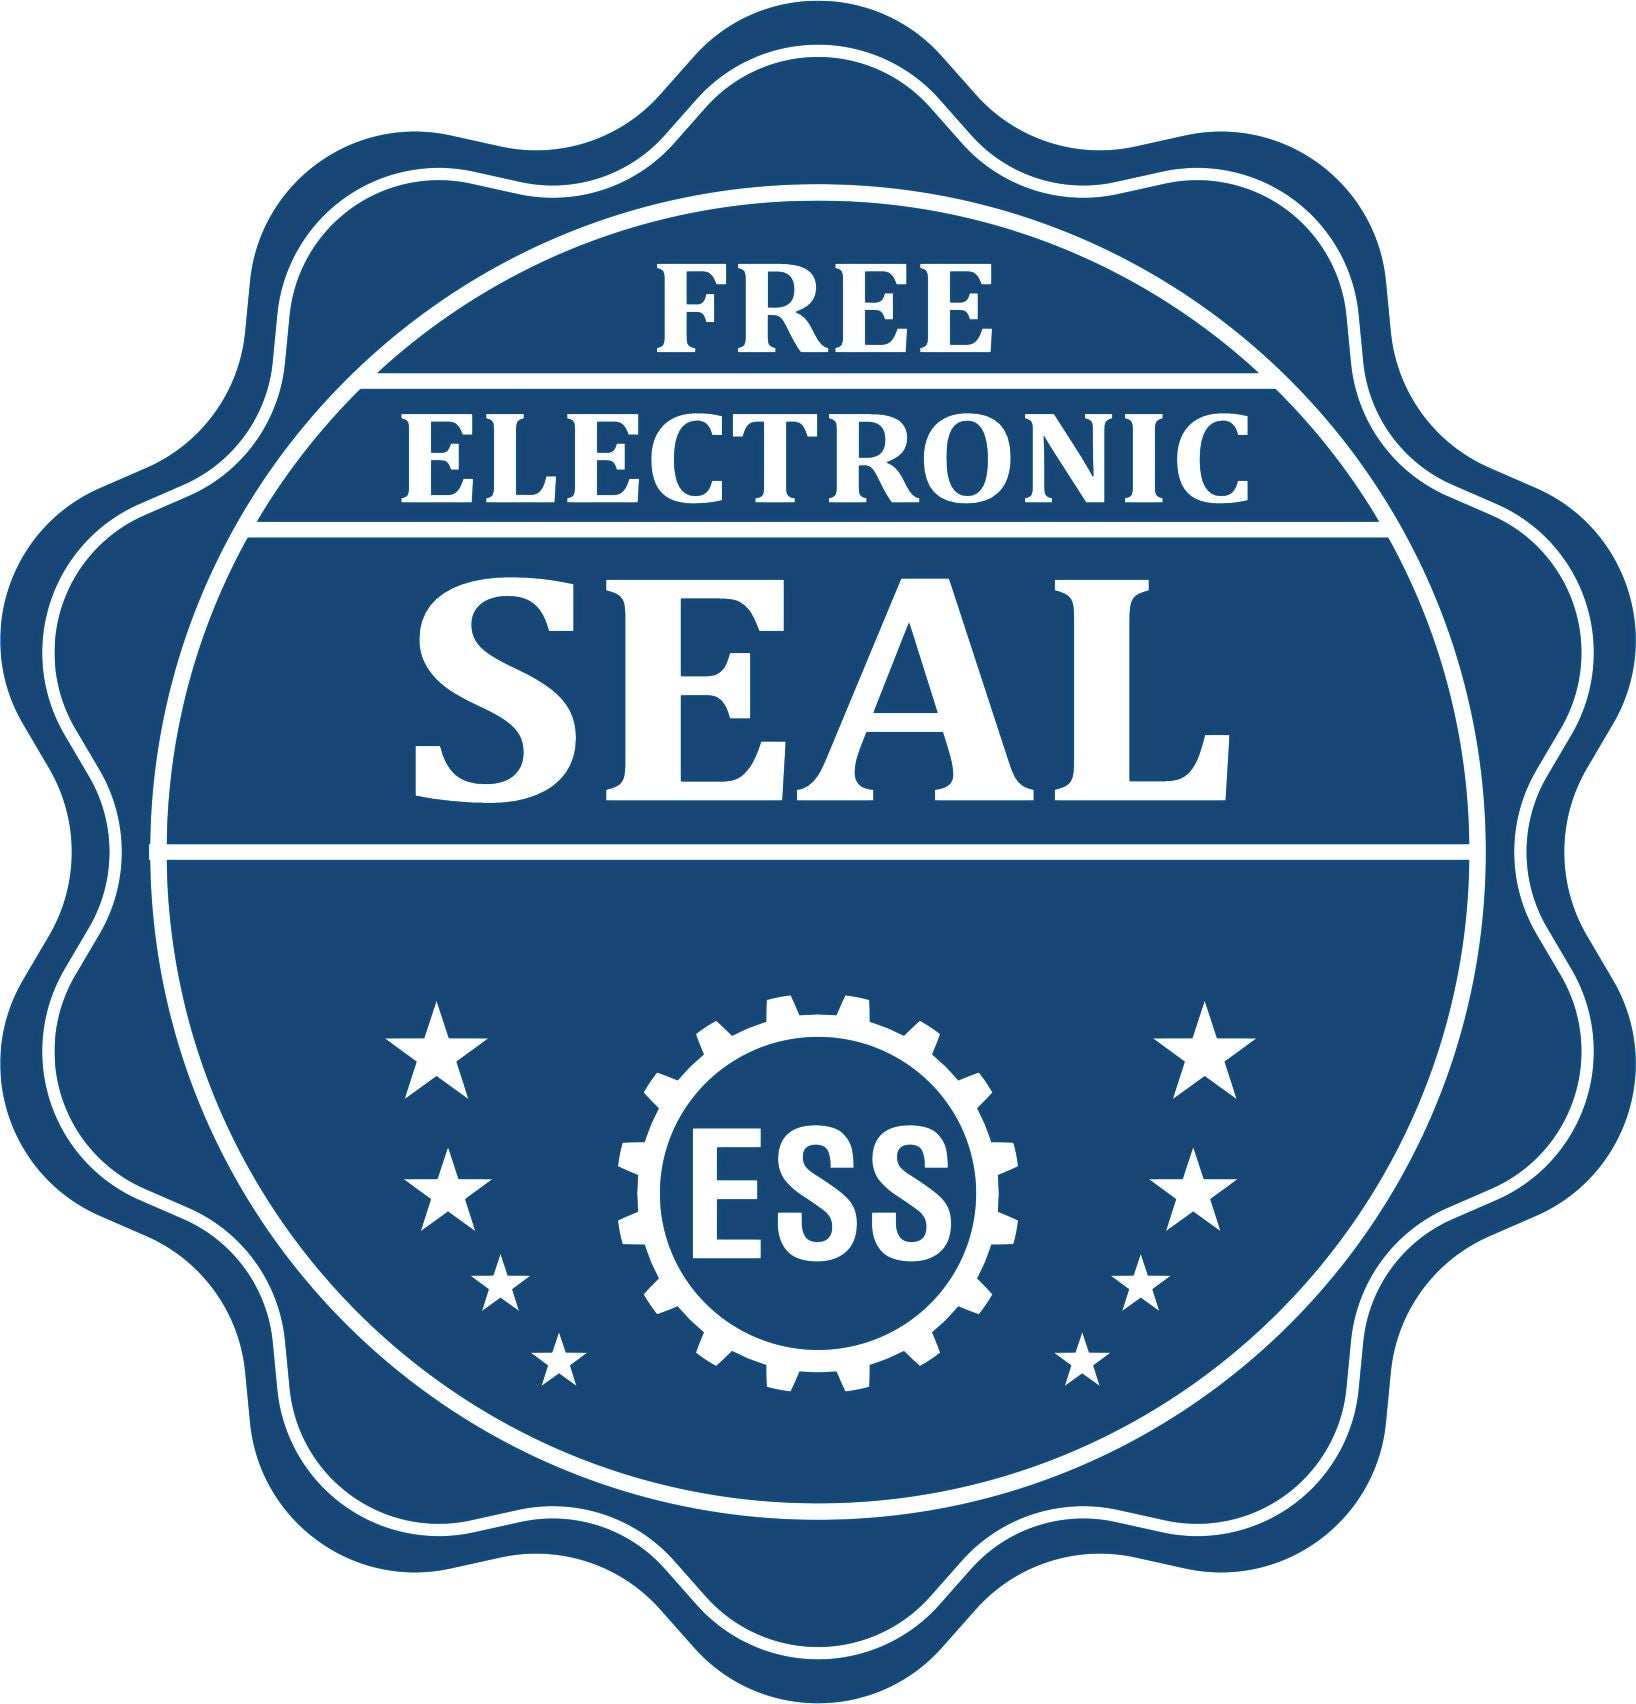 A badge showing a free electronic seal for the Hybrid Ohio Engineer Seal with stars and the ESS gear on the emblem.